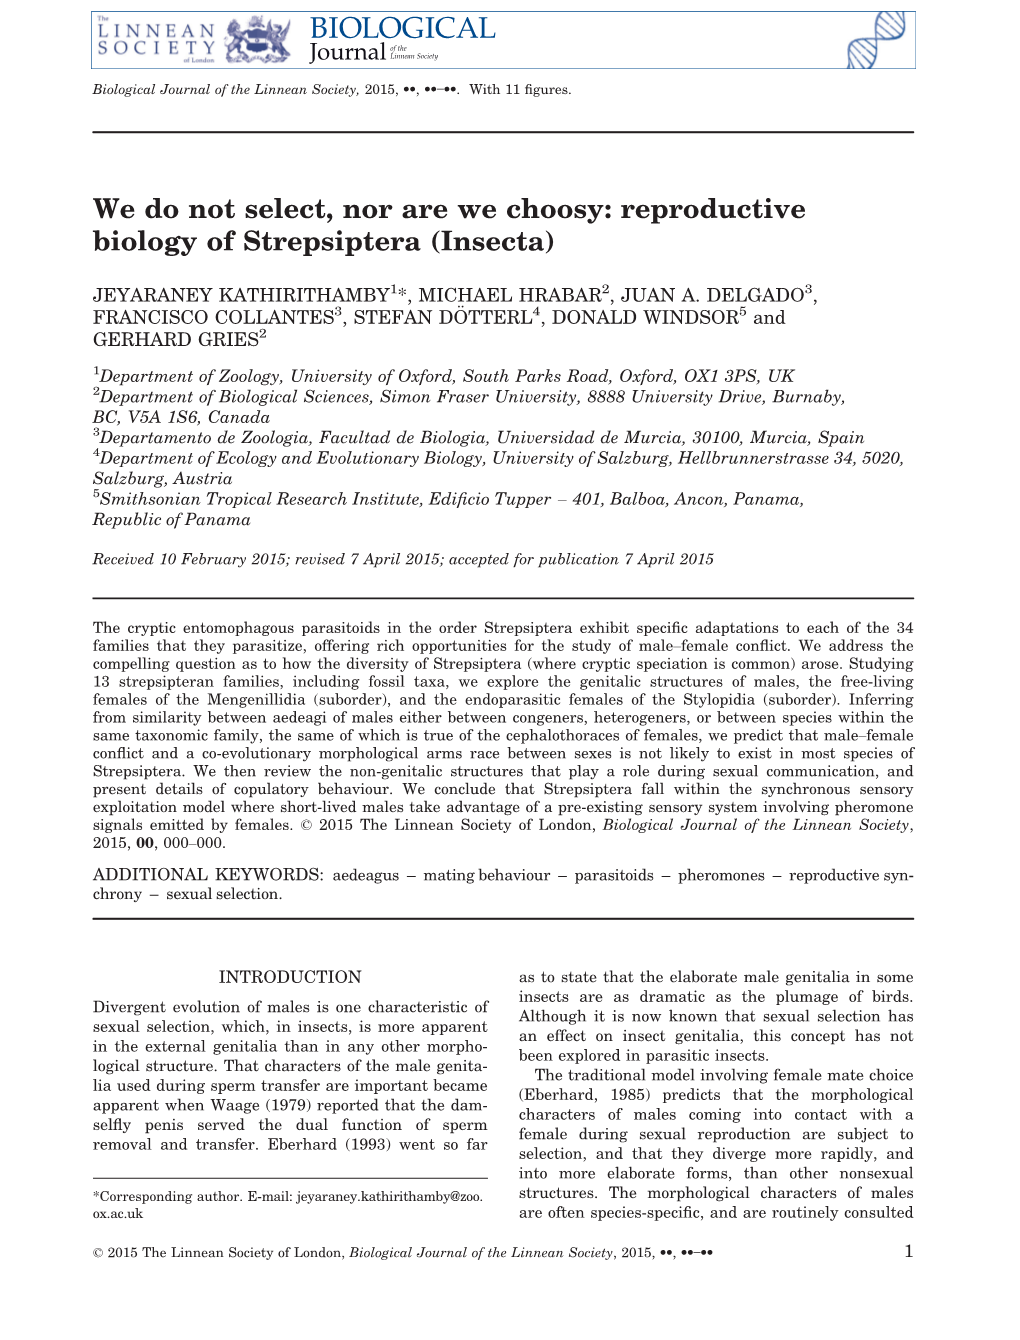 We Do Not Select, Nor Are We Choosy: Reproductive Biology of Strepsiptera (Insecta)